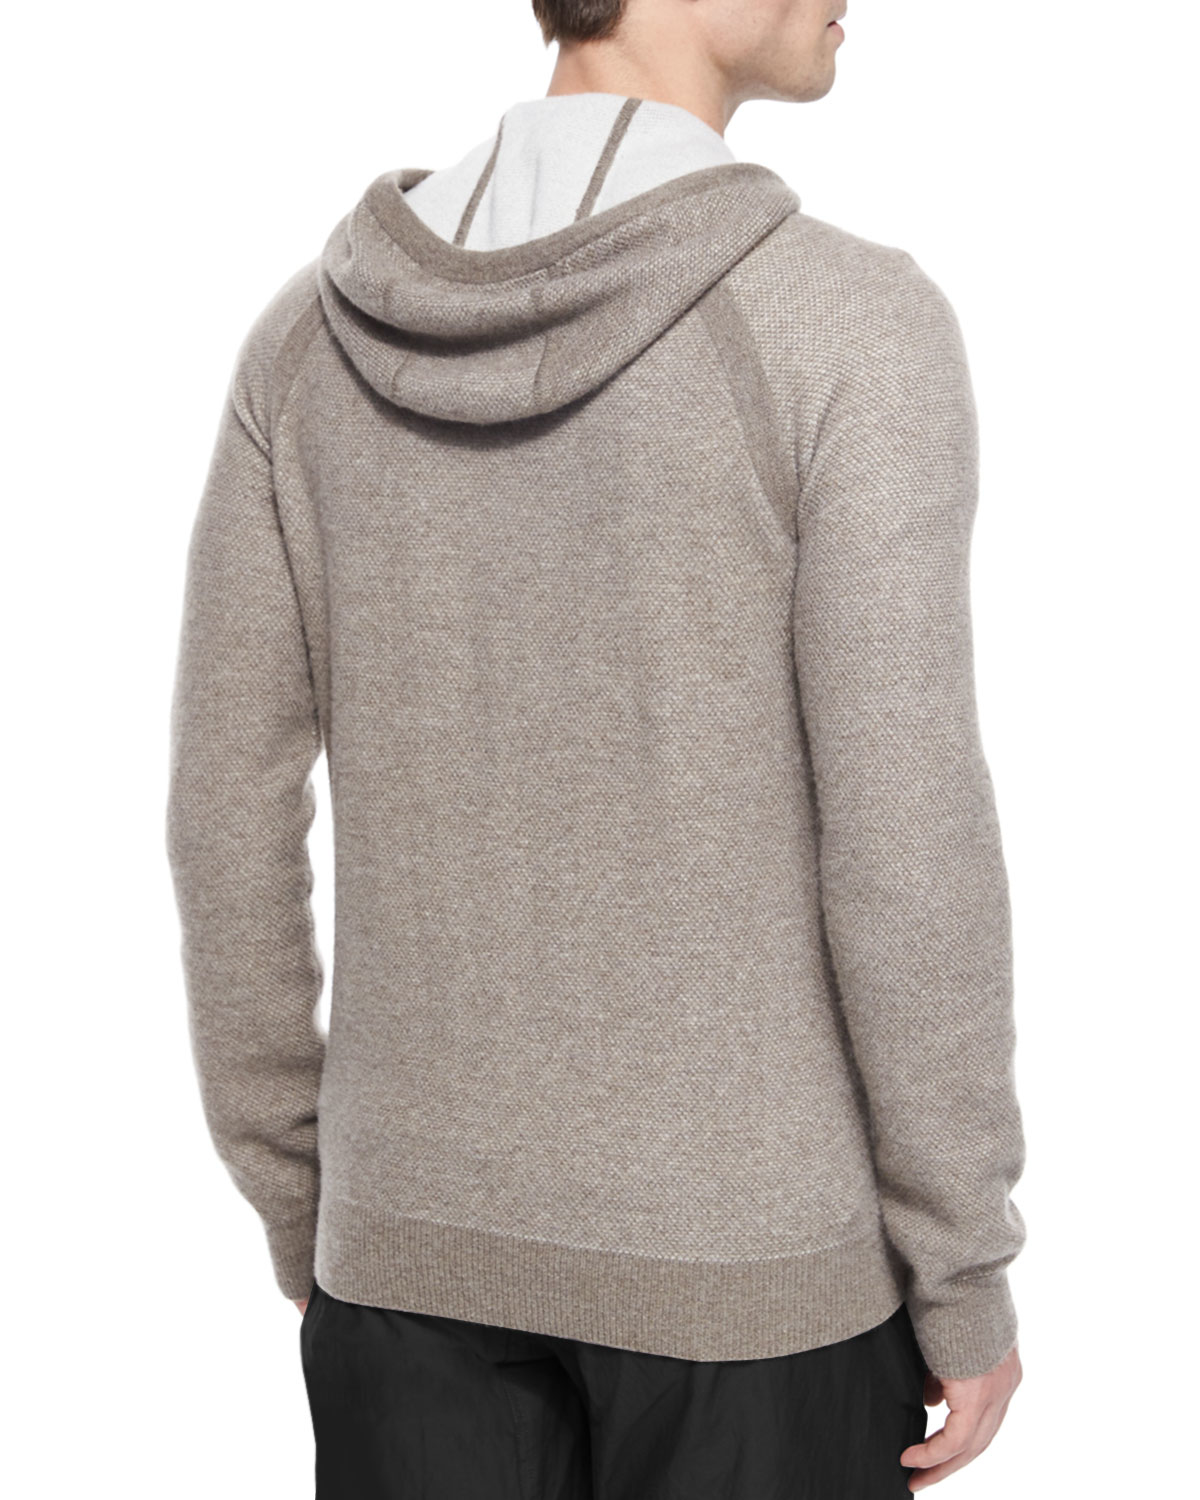 Lyst - Vince Plaited Tuck Cashmere Hoodie in Natural for Men